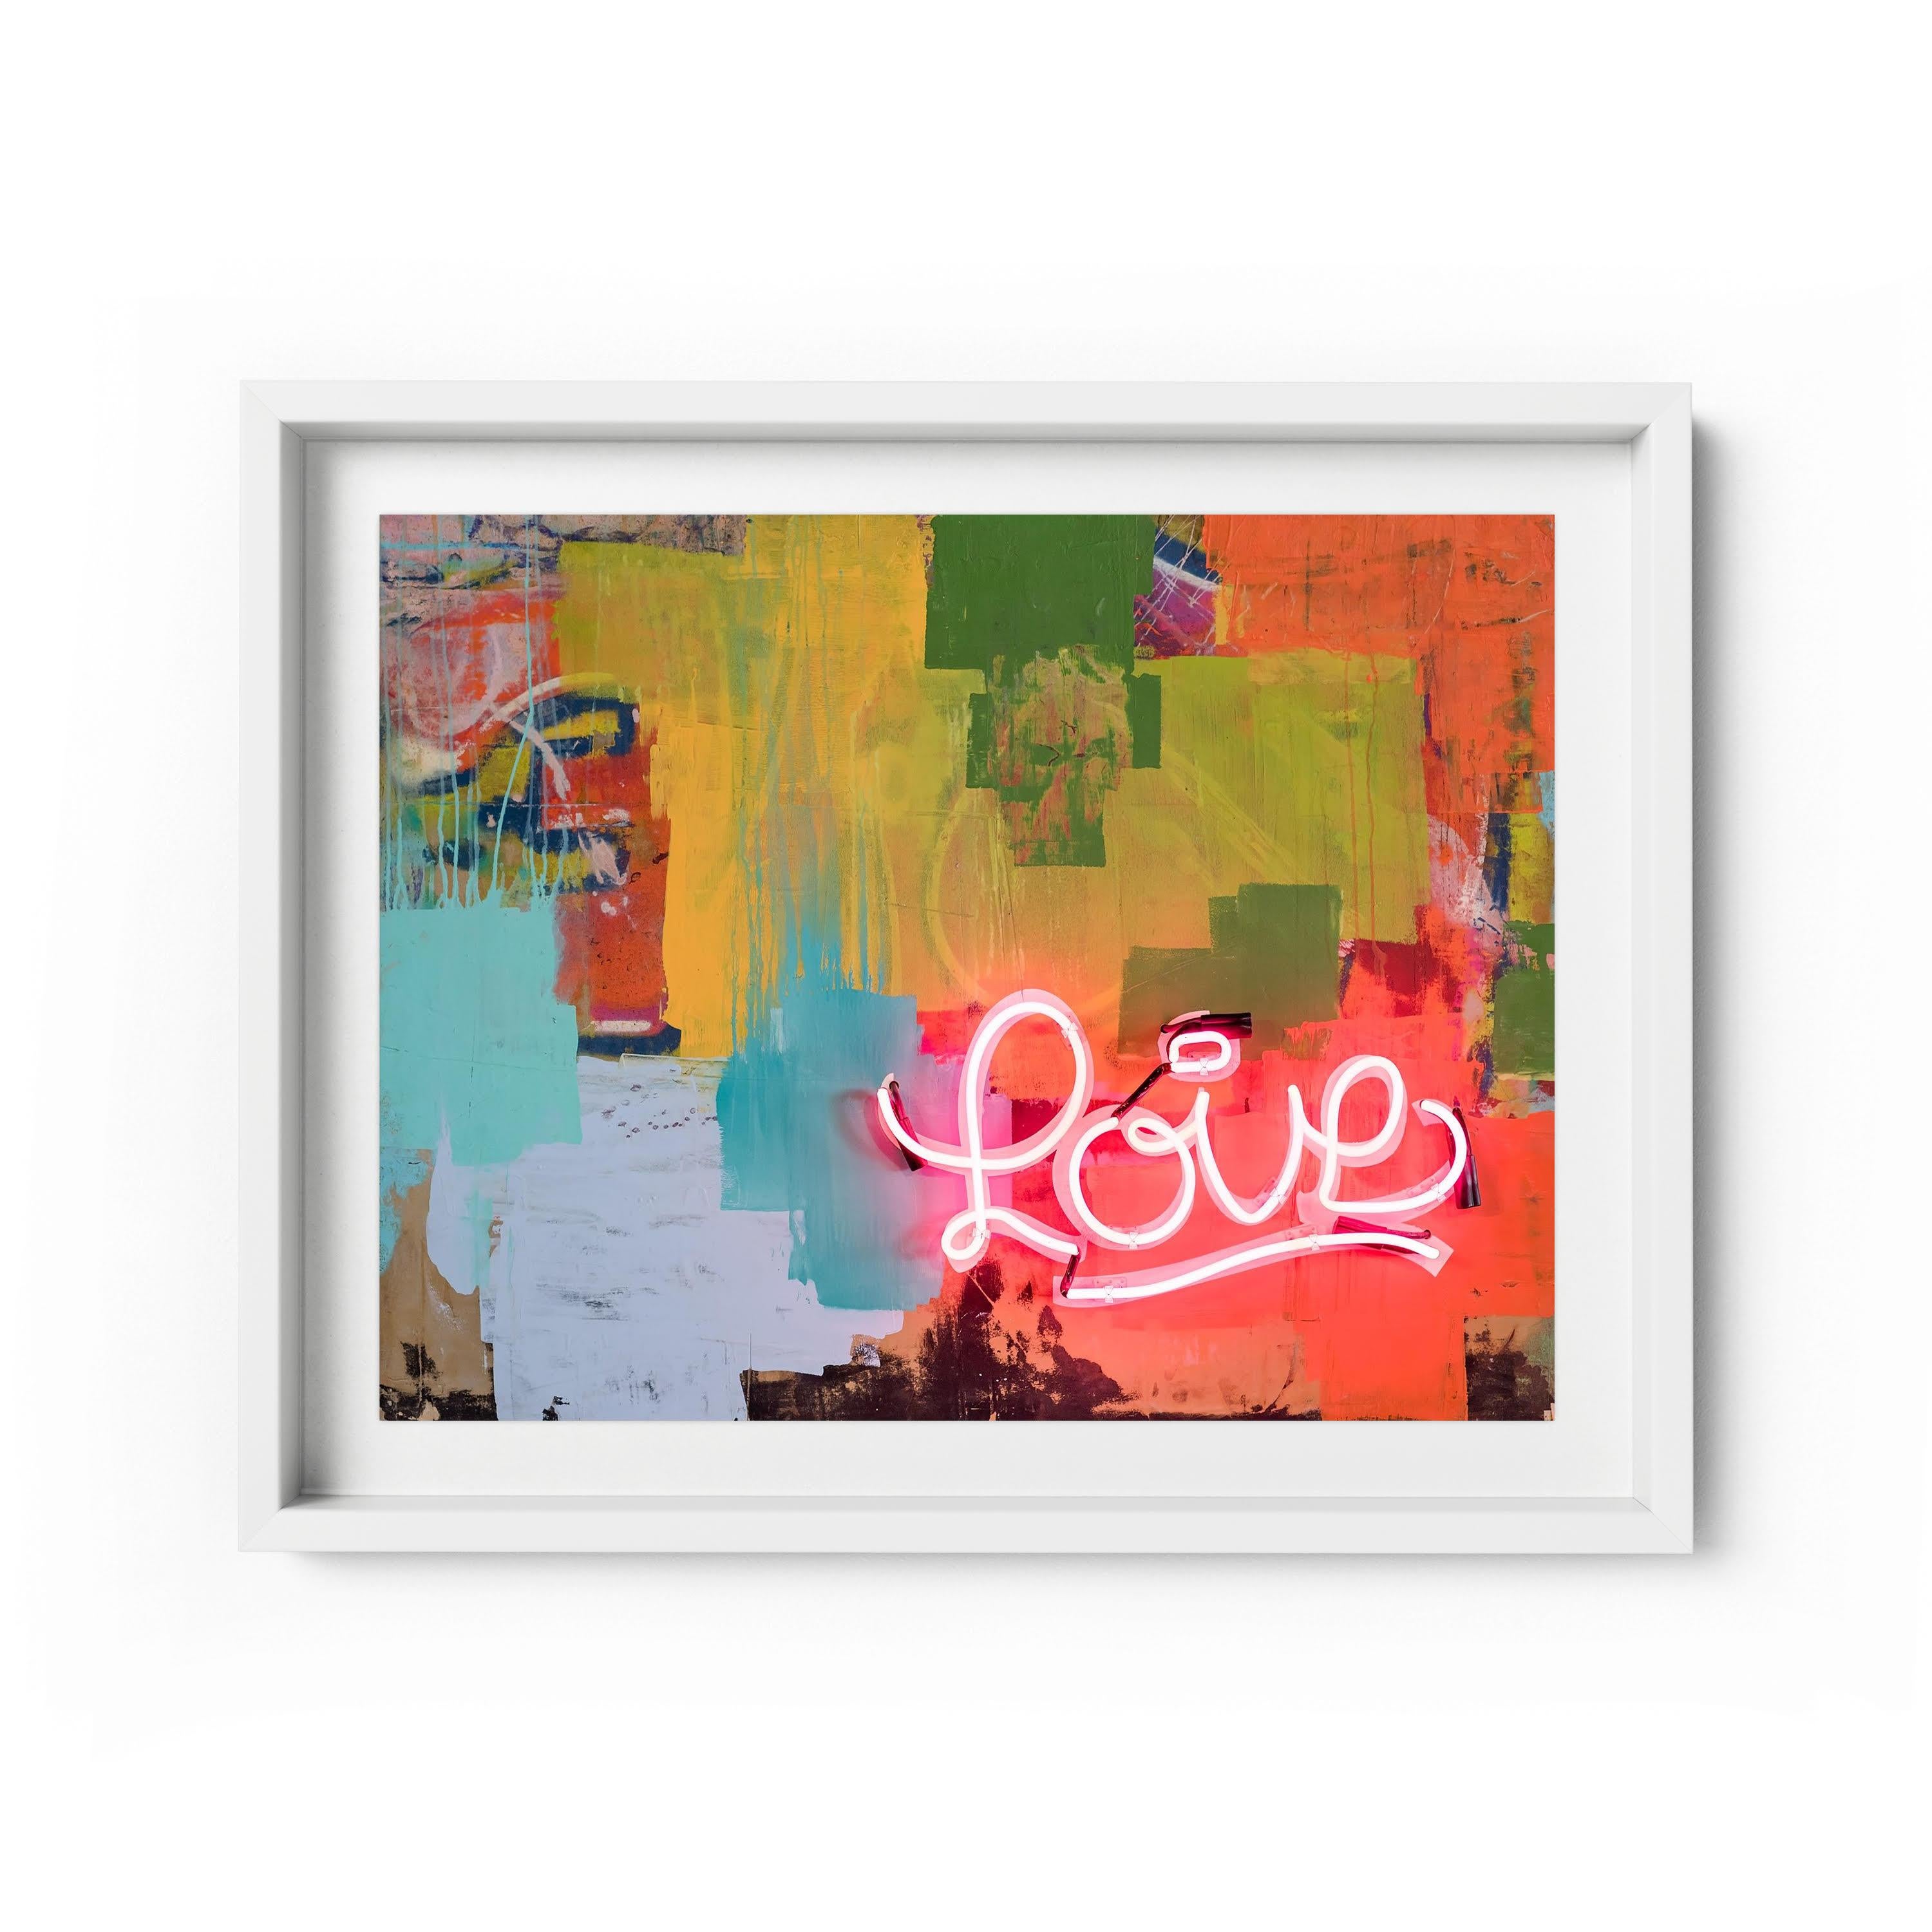 Karlos Marquez Abstract Print - Love vs. Love - Framed Limited Edition Print - Contemporary - Modern Abstract